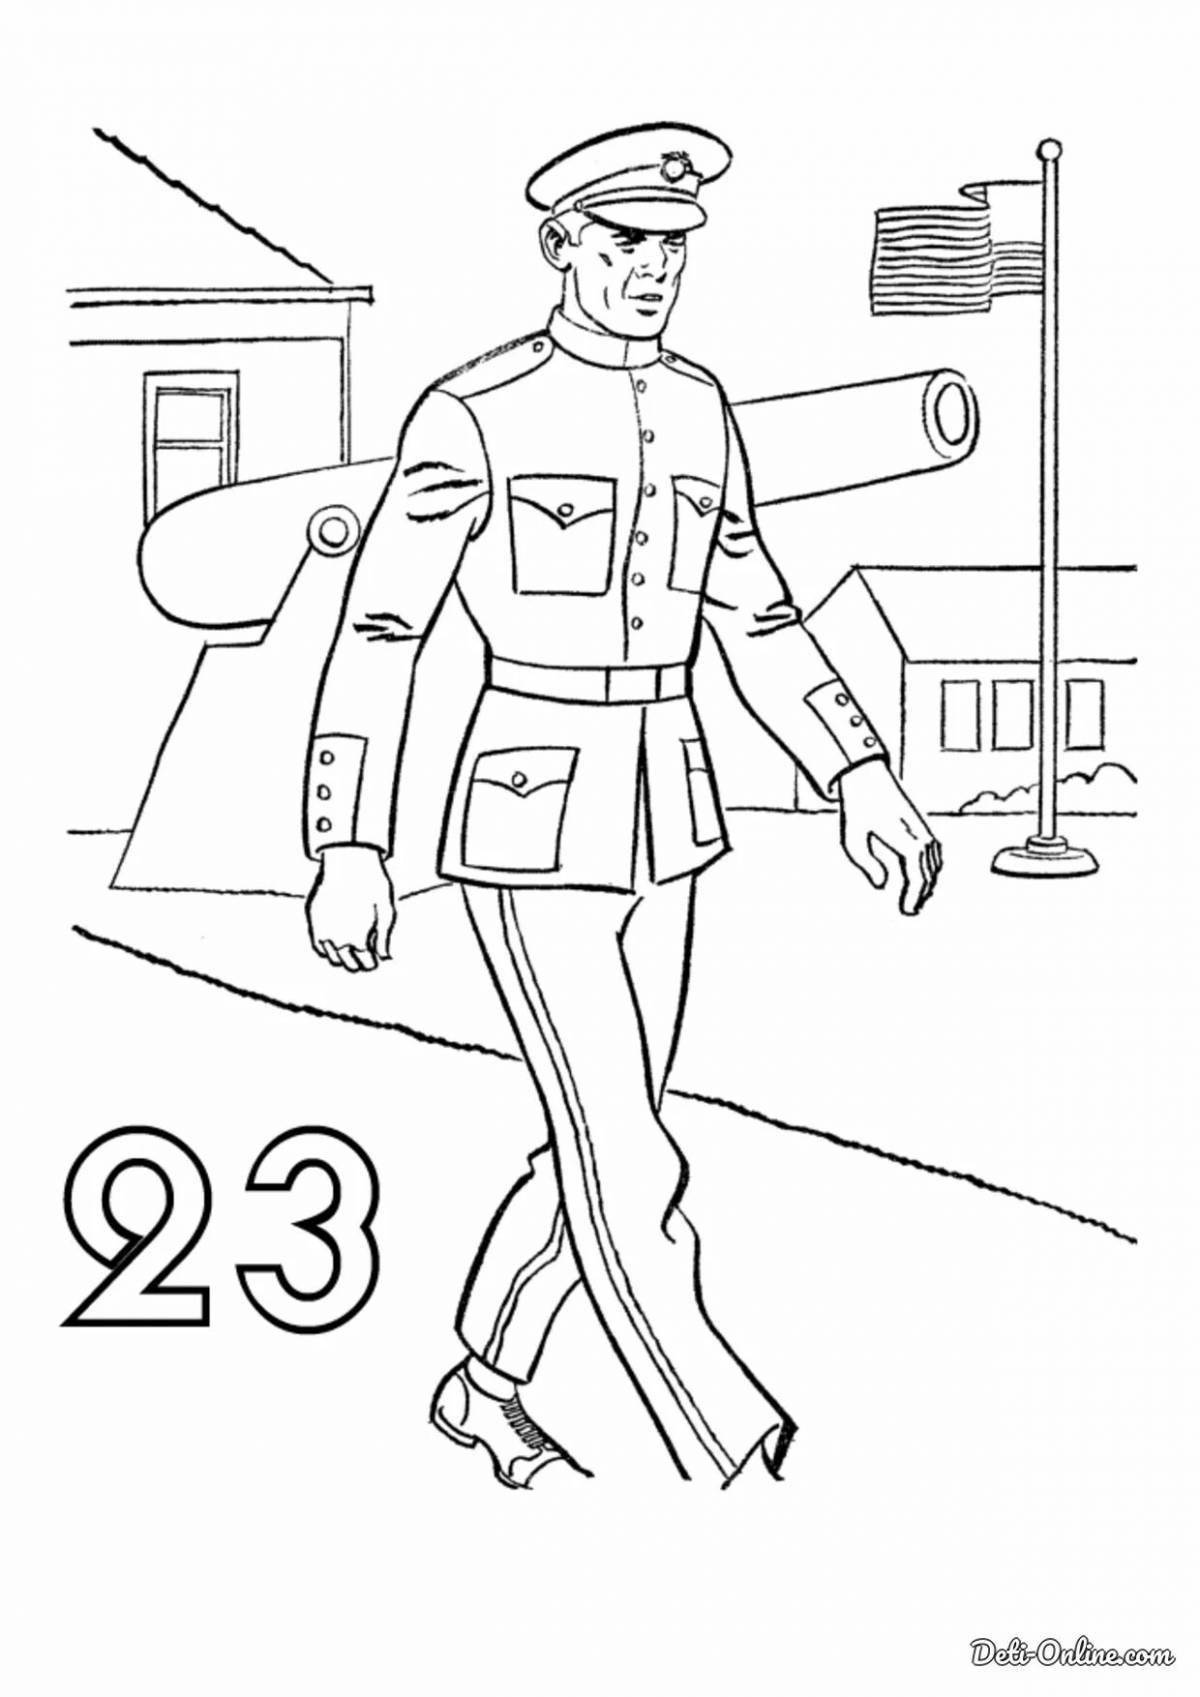 Impressive soldier coloring page